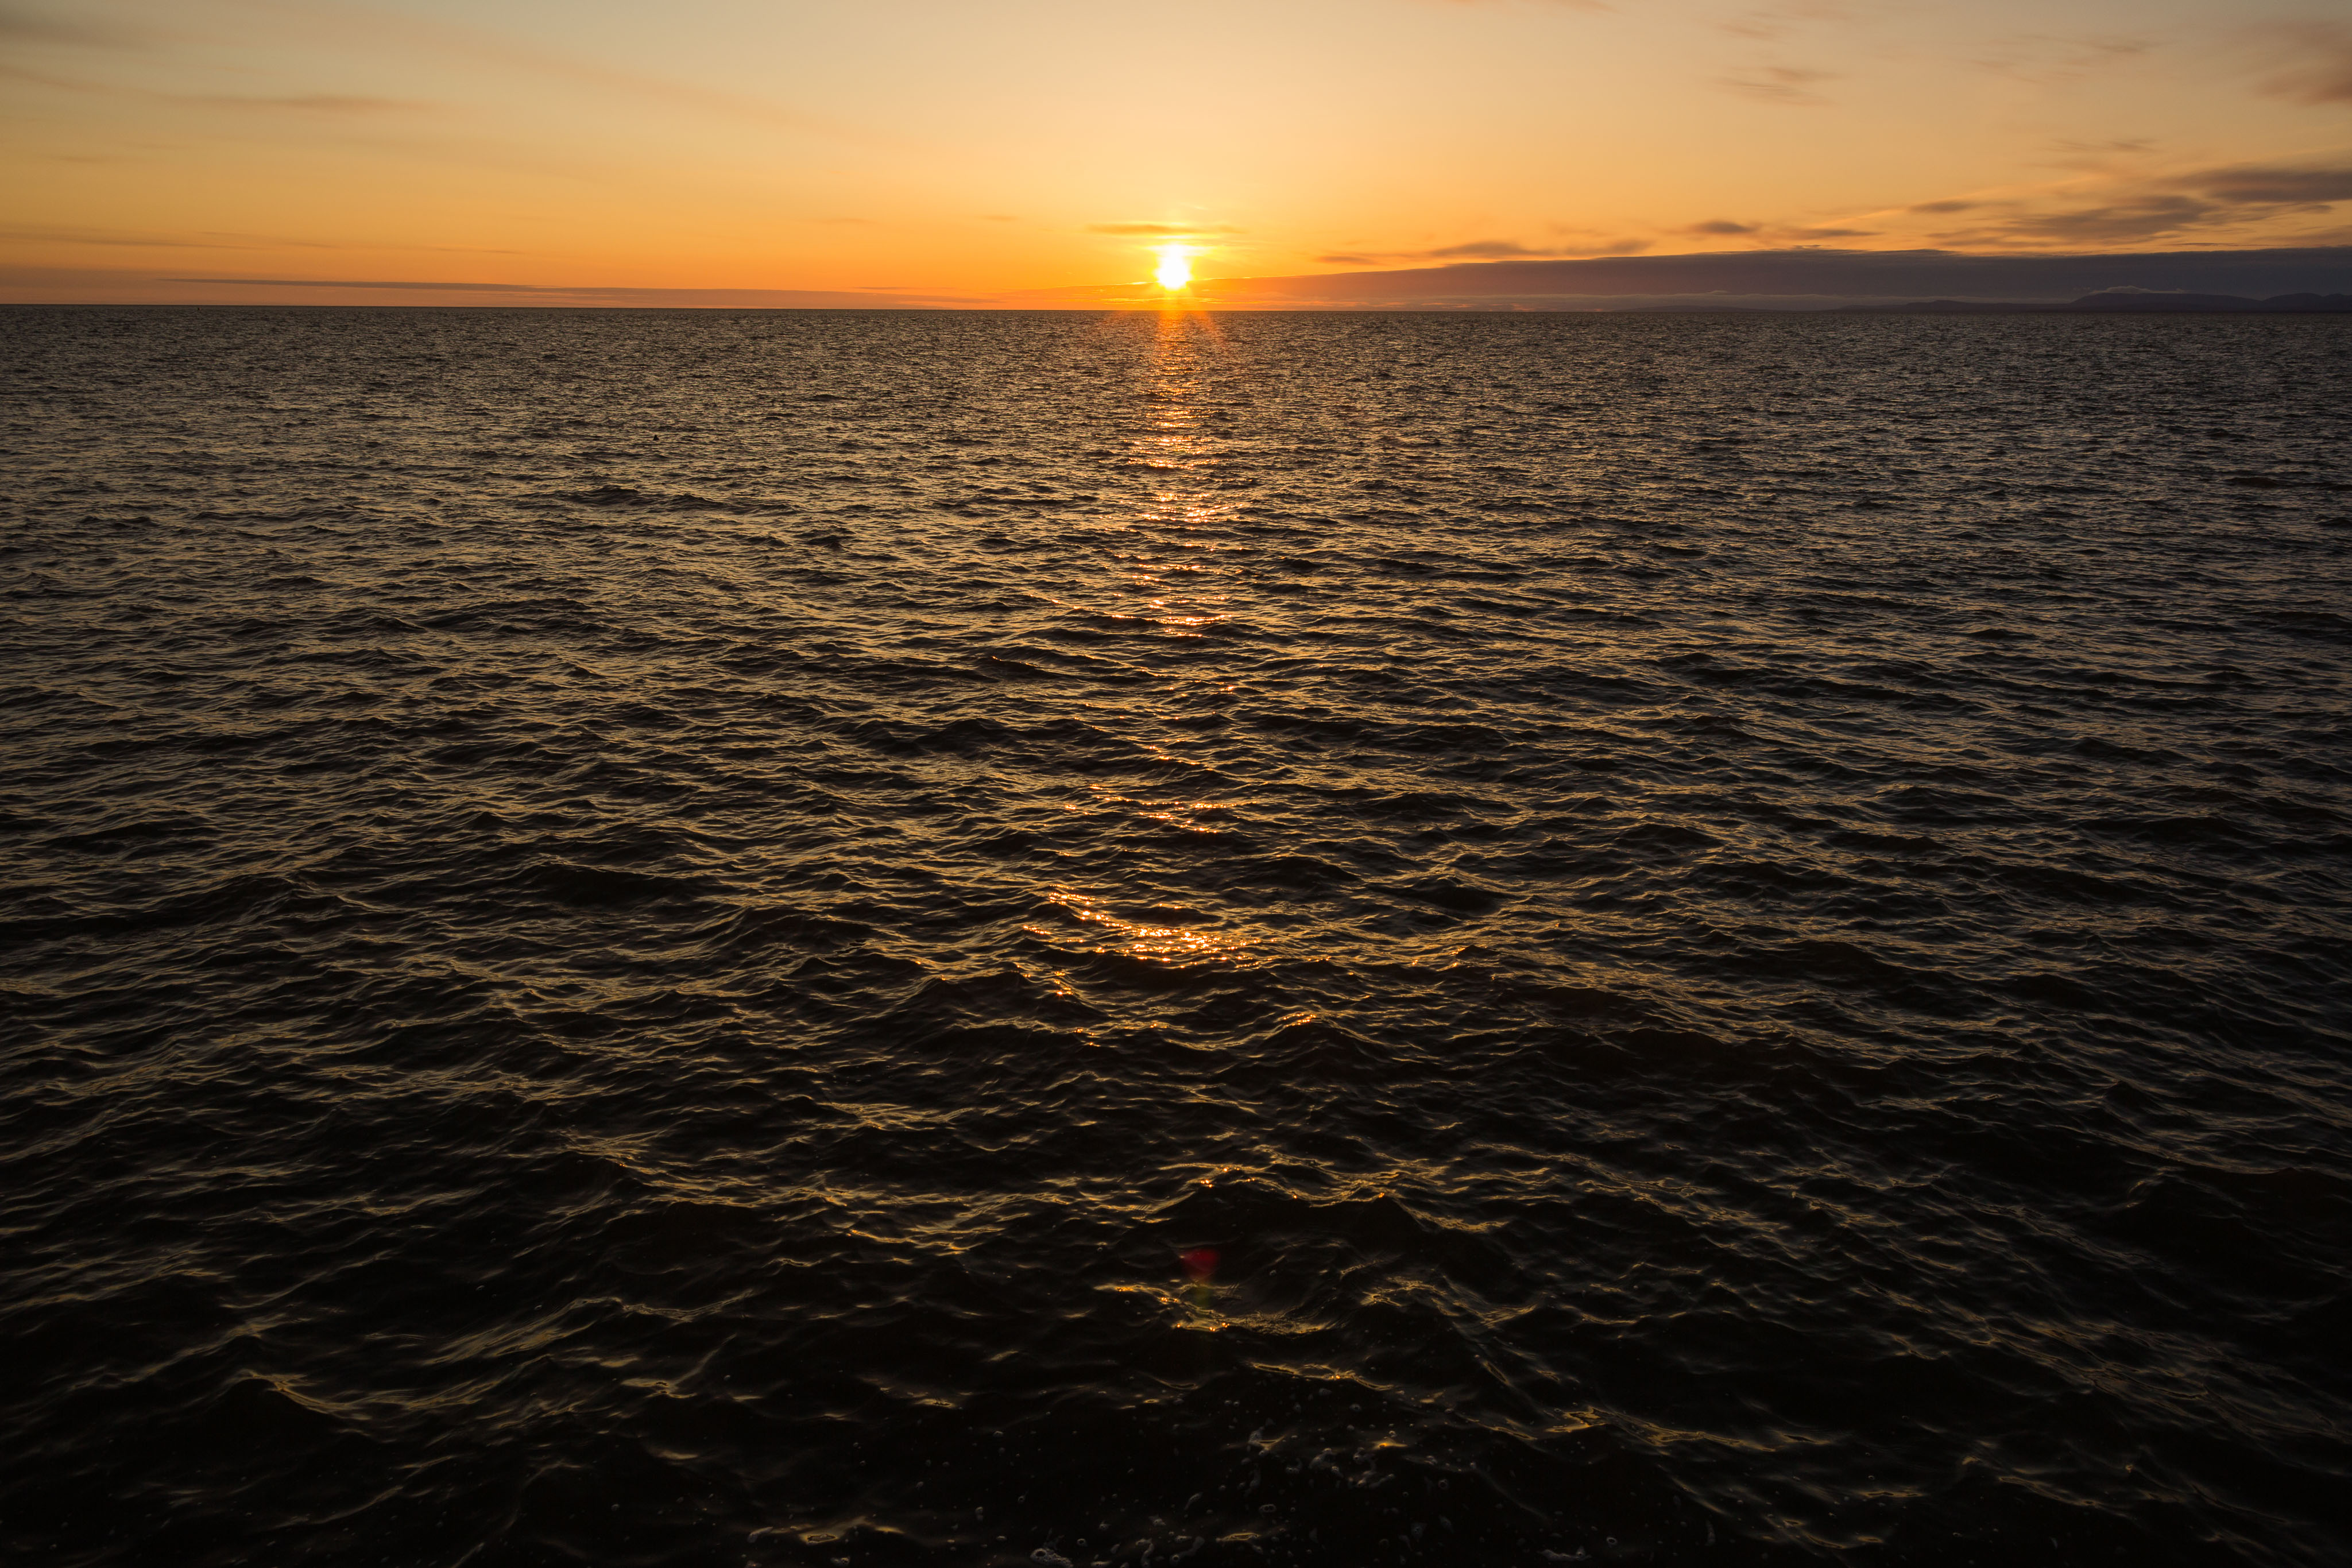 Sunset on the Chukchi Sea in Kotzebue on Monday, August 31, 2015. President Obama will visit the Northwest Arctic community on Wednesday, the first time a president will set foot in the American Arctic.